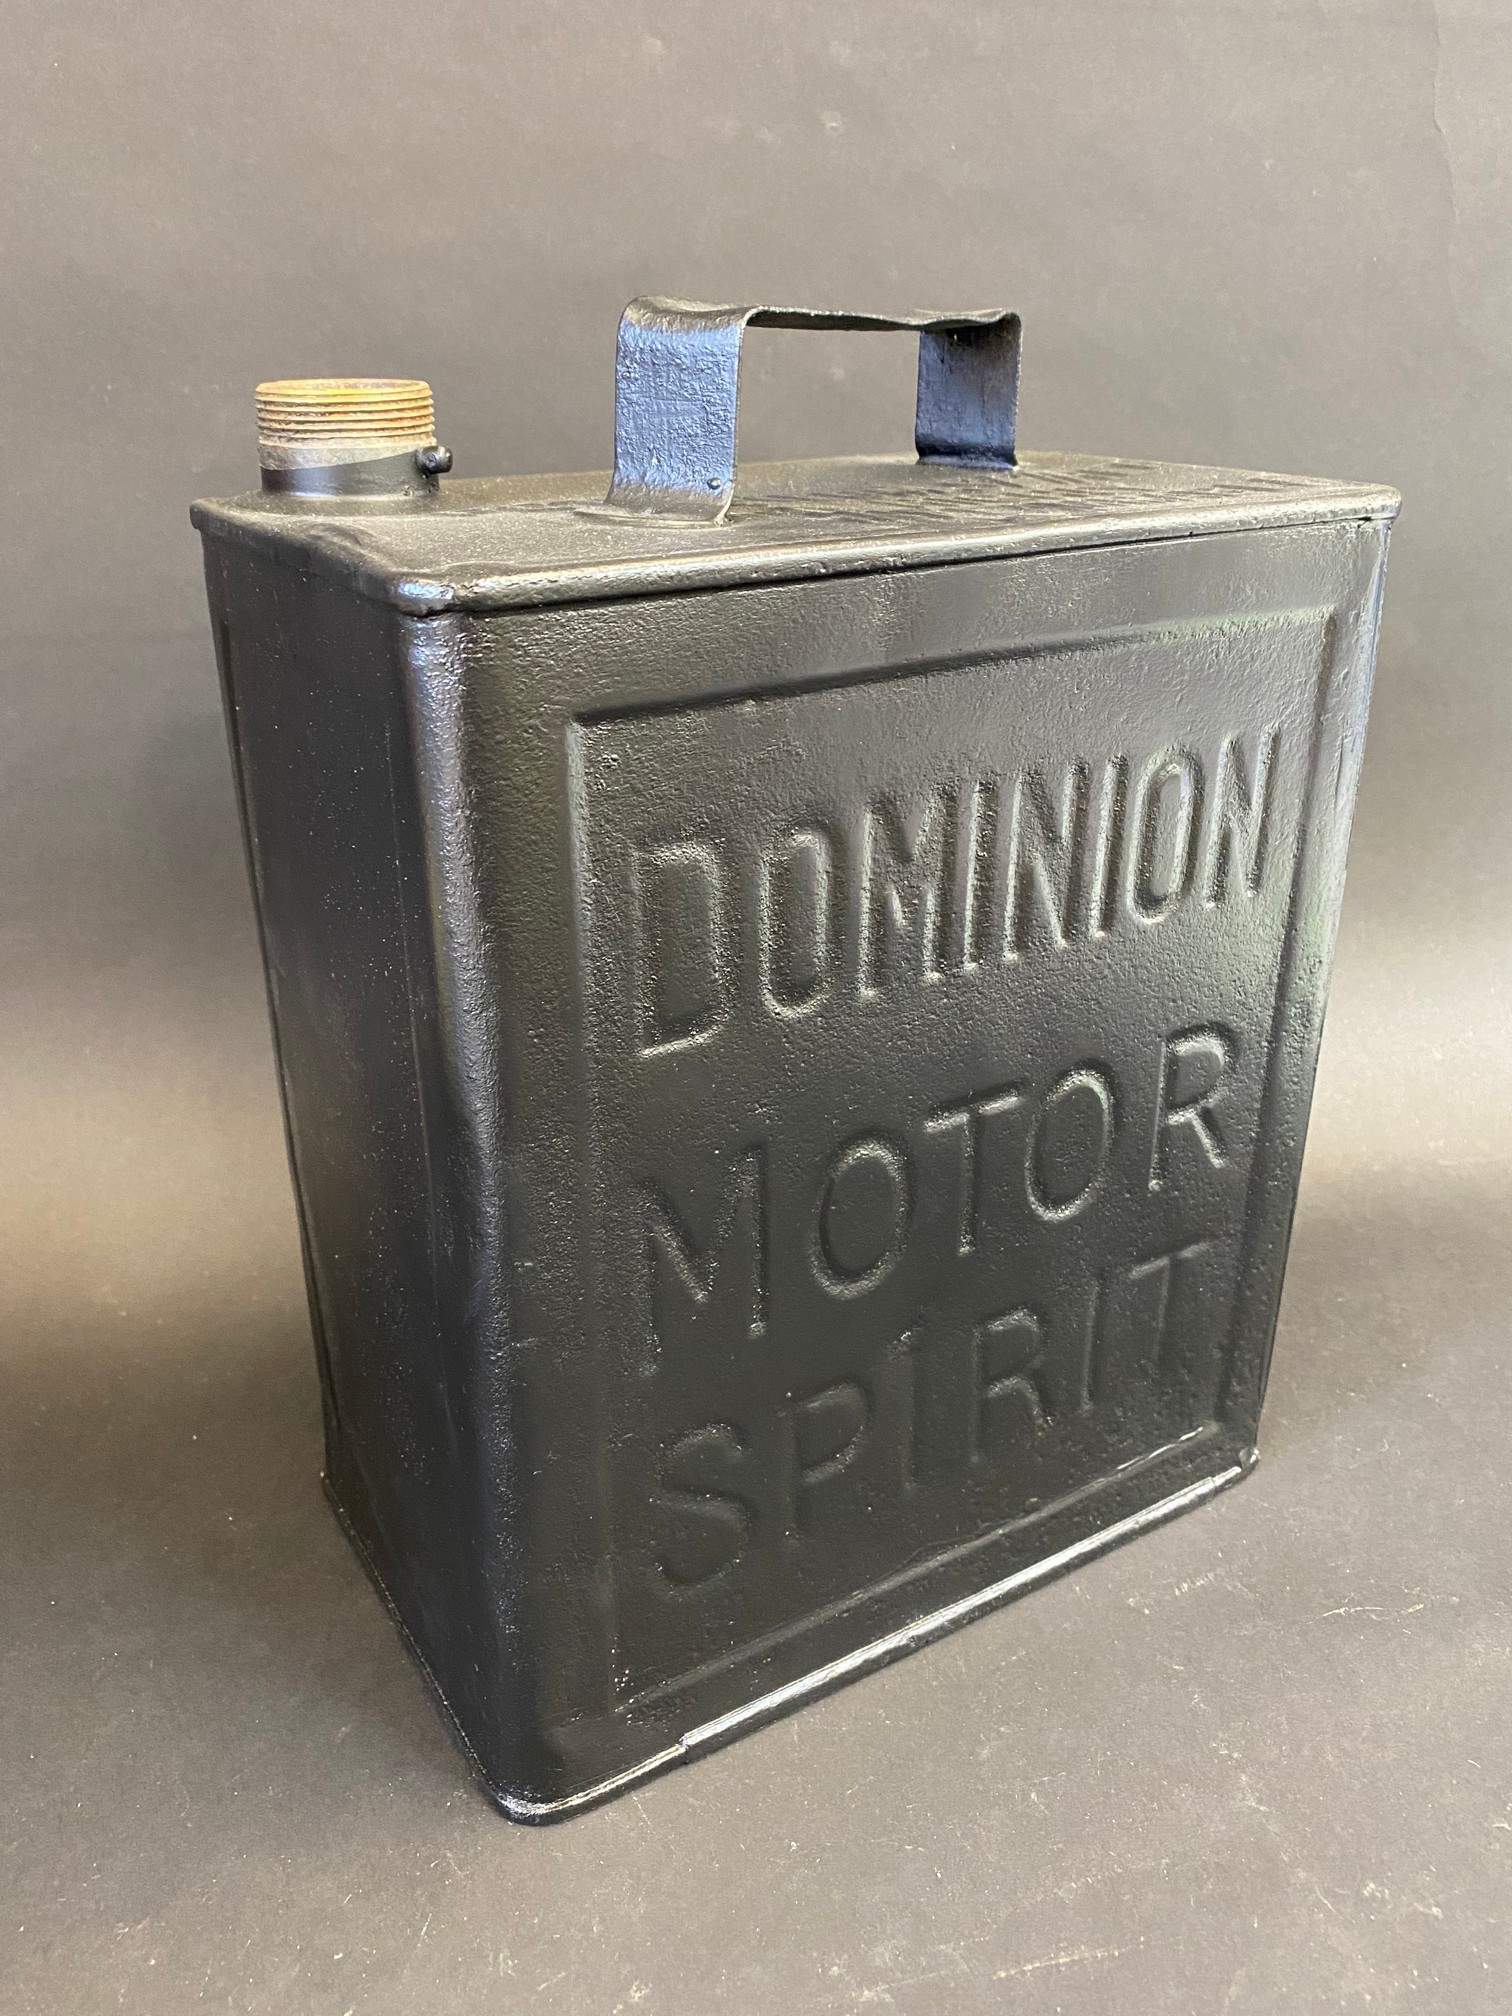 A Dominion Motor Spirit two gallon petrol can by Feaver.